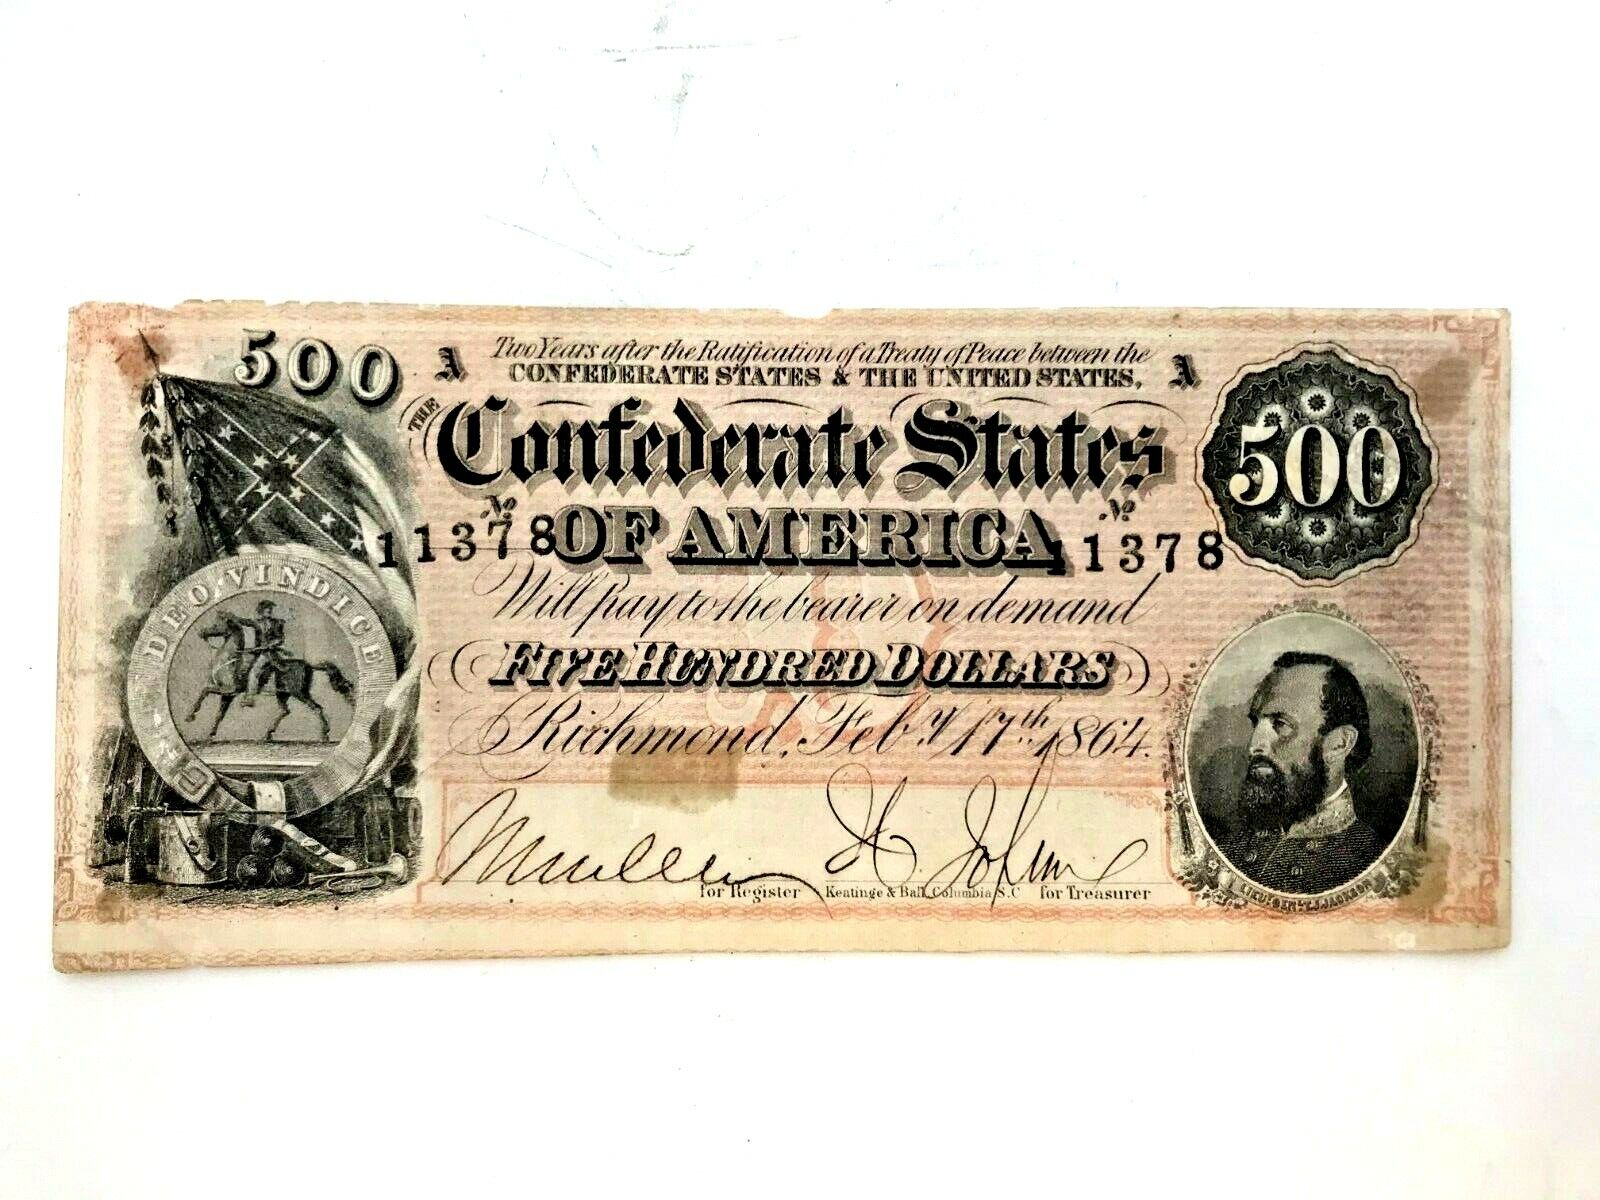 RARE CSA FIVE HUNDRED BILL CURRENCY - RICHMOND 1864 - RARE CURRENCY